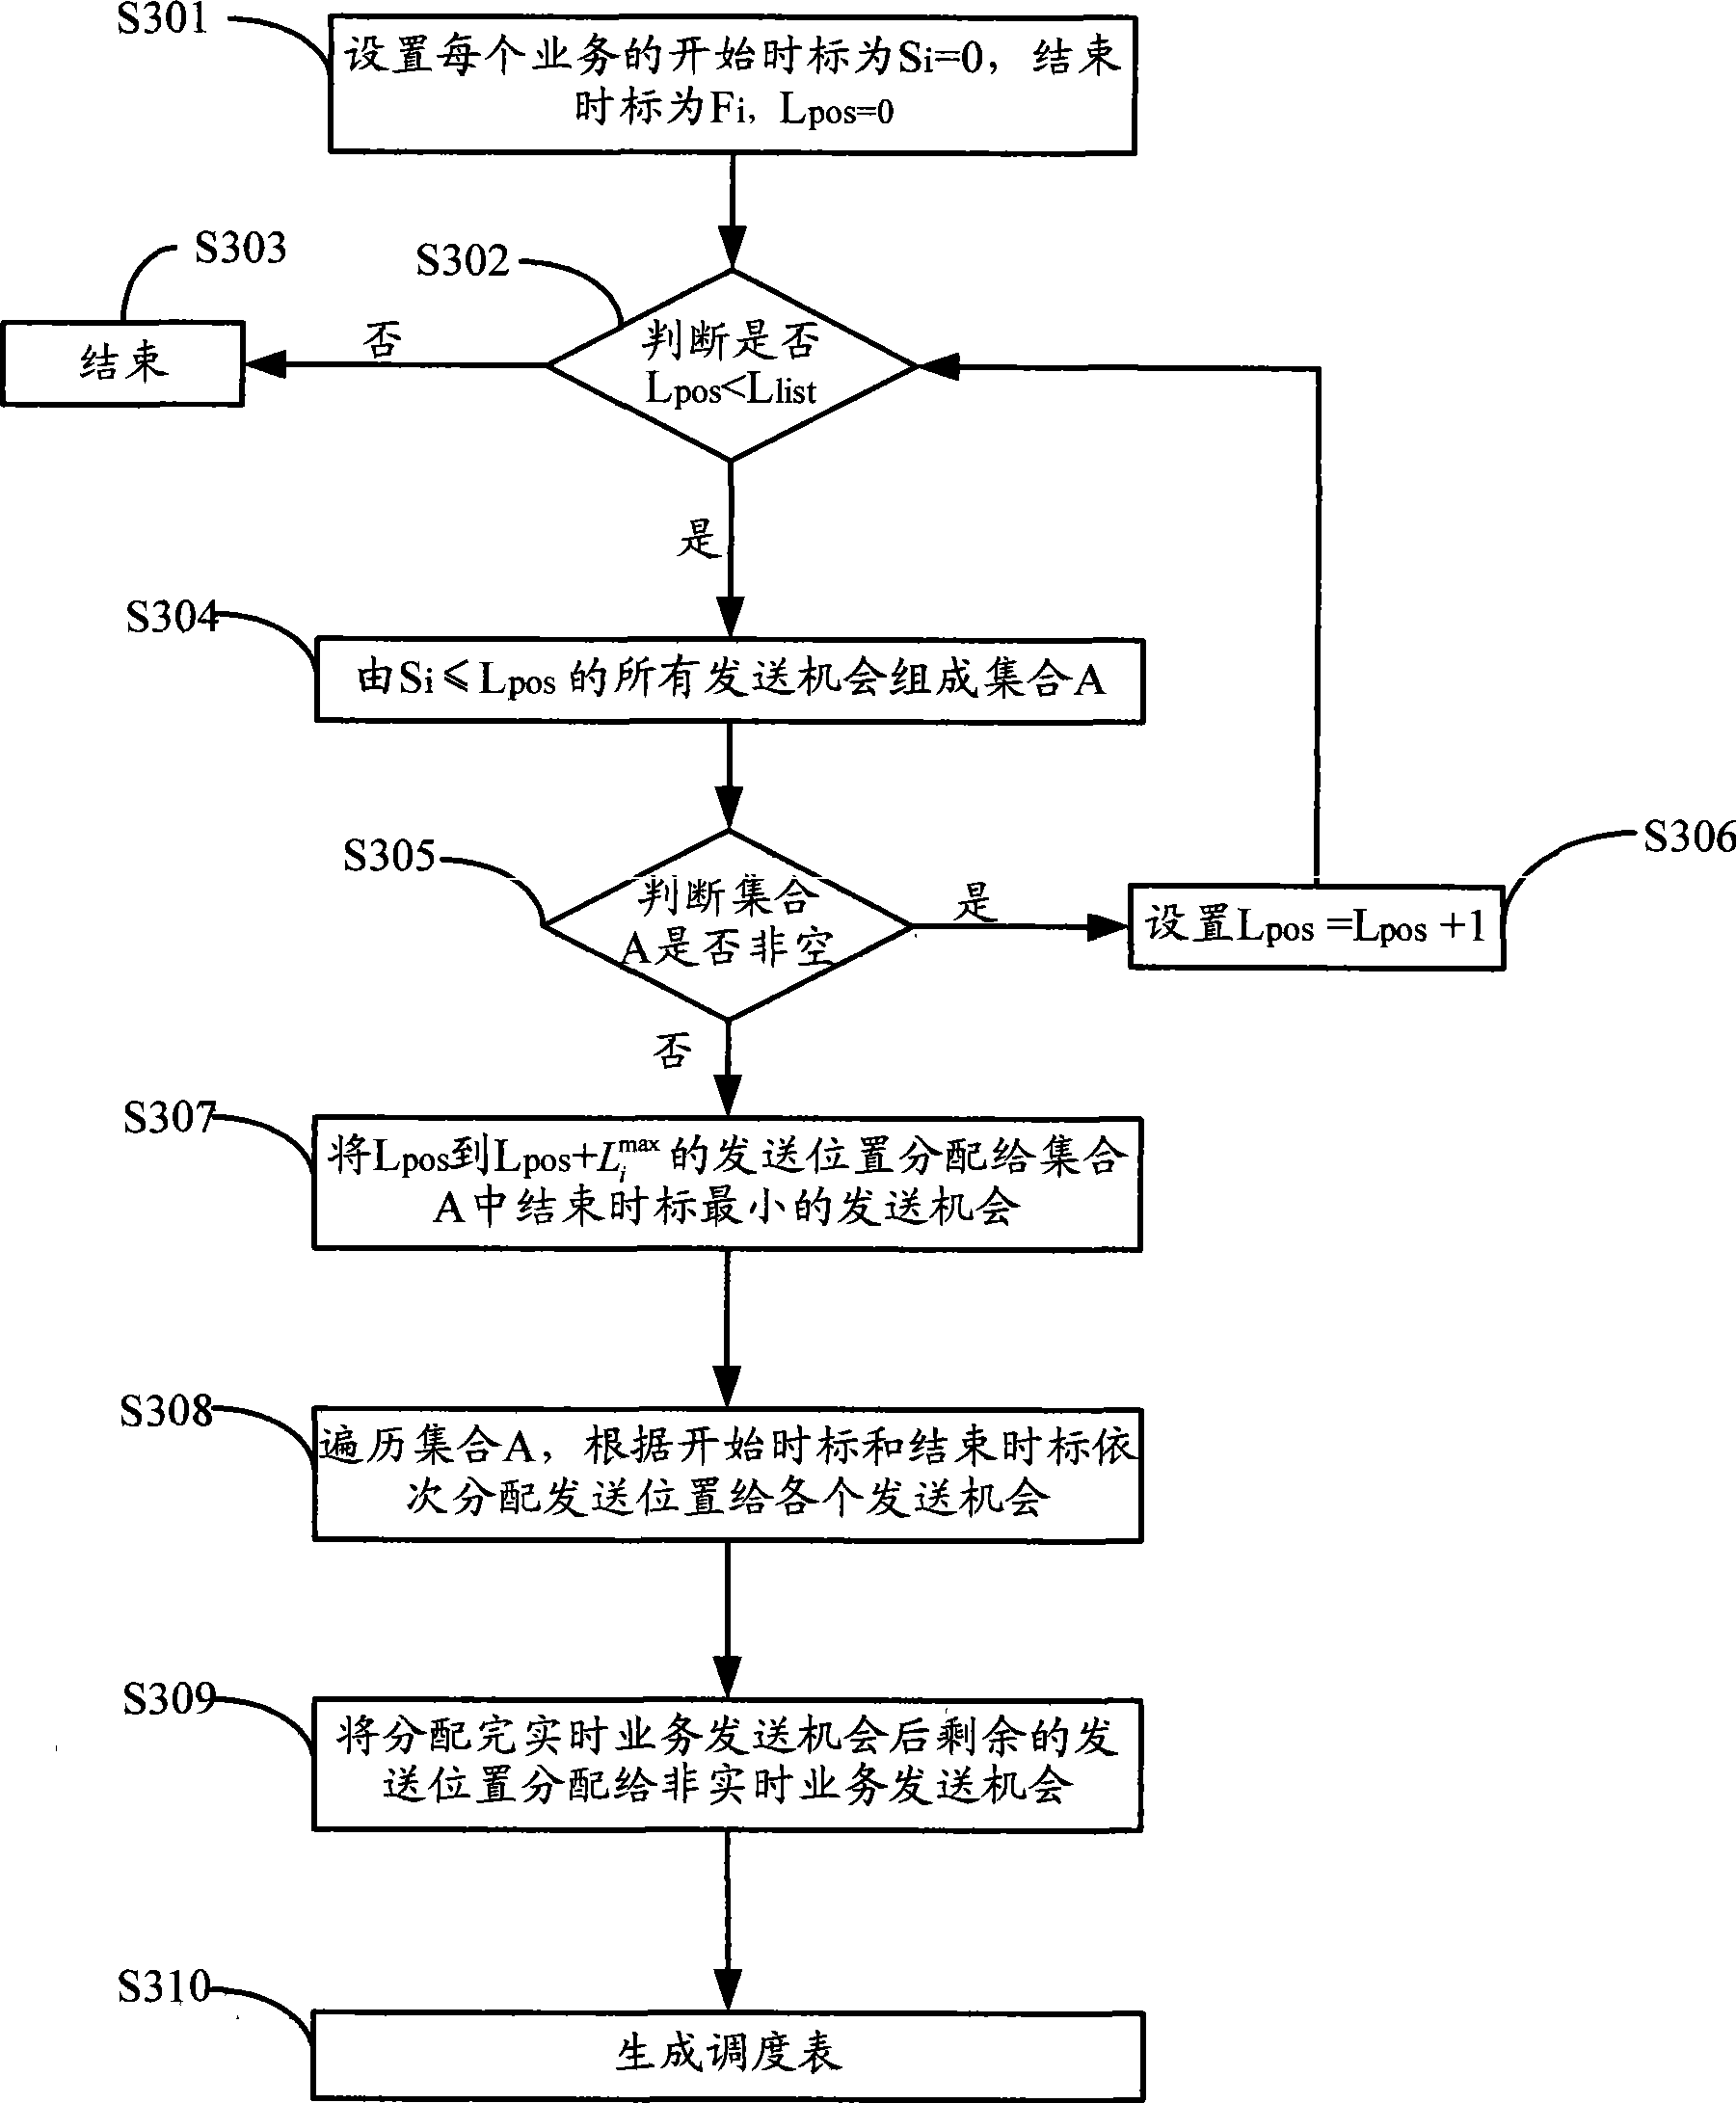 Method and apparatus for scheduling business